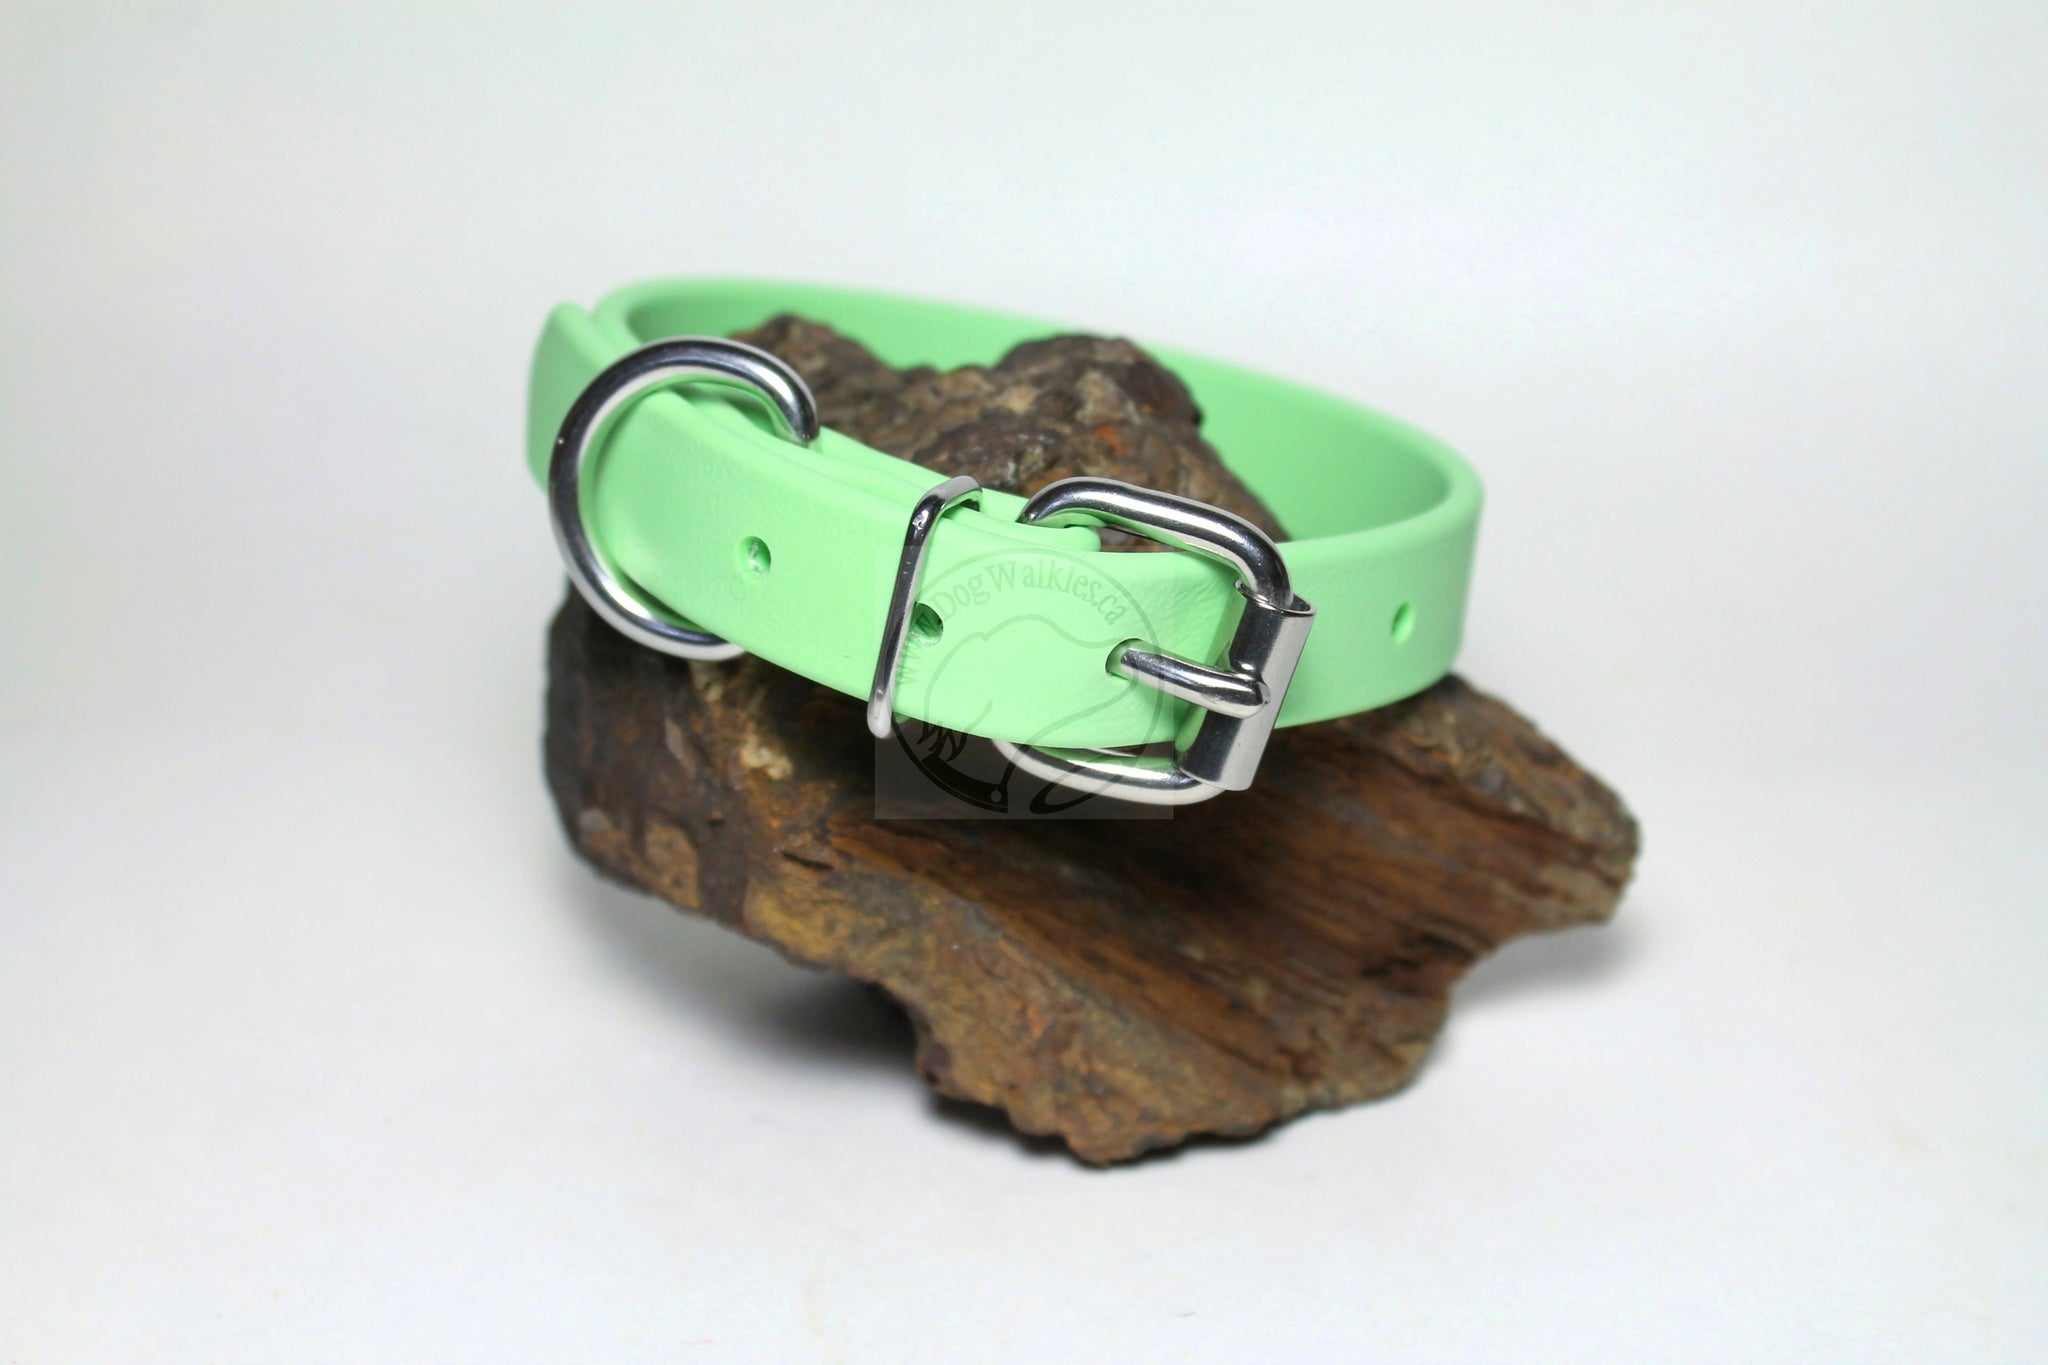 Discontinued- Limited Pastel Mint Green Biothane Dog Collar - 3/4" (20mm) wide